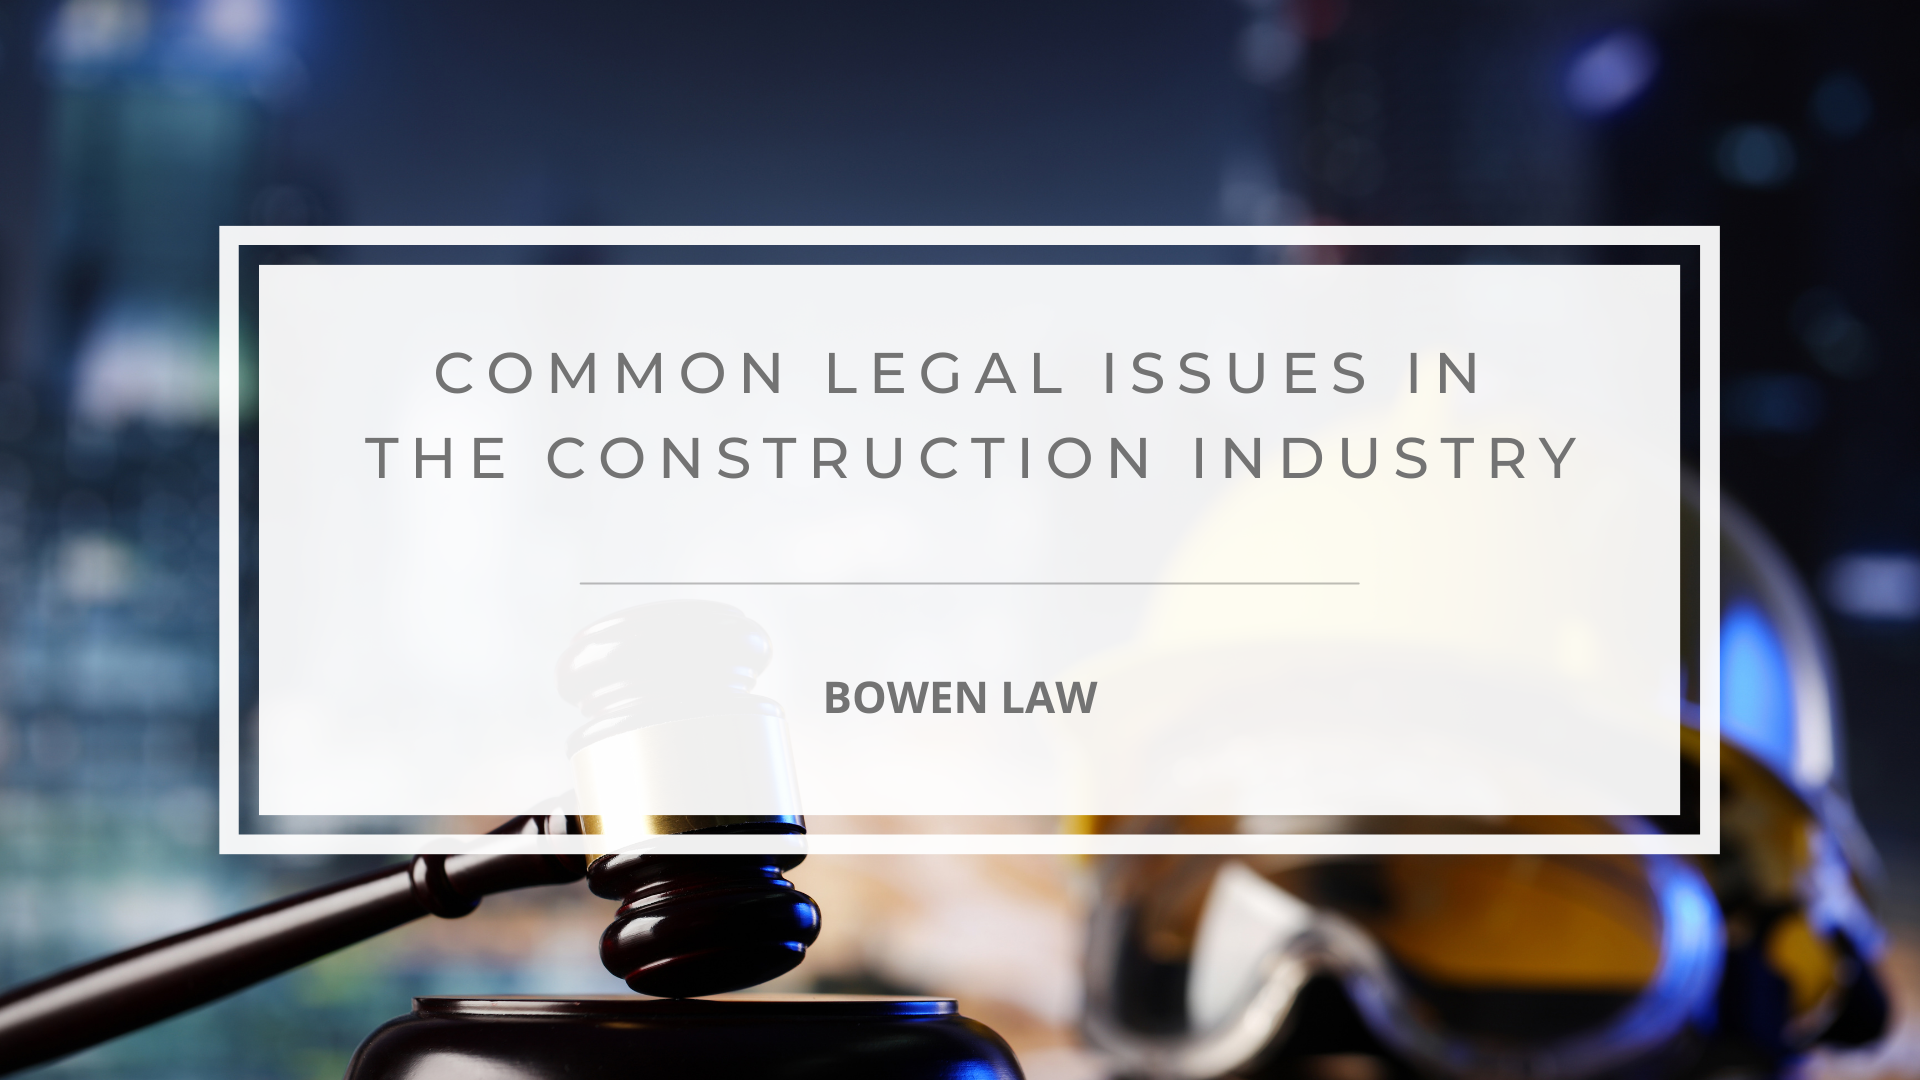 Featured image of common legal issues in the construction industry